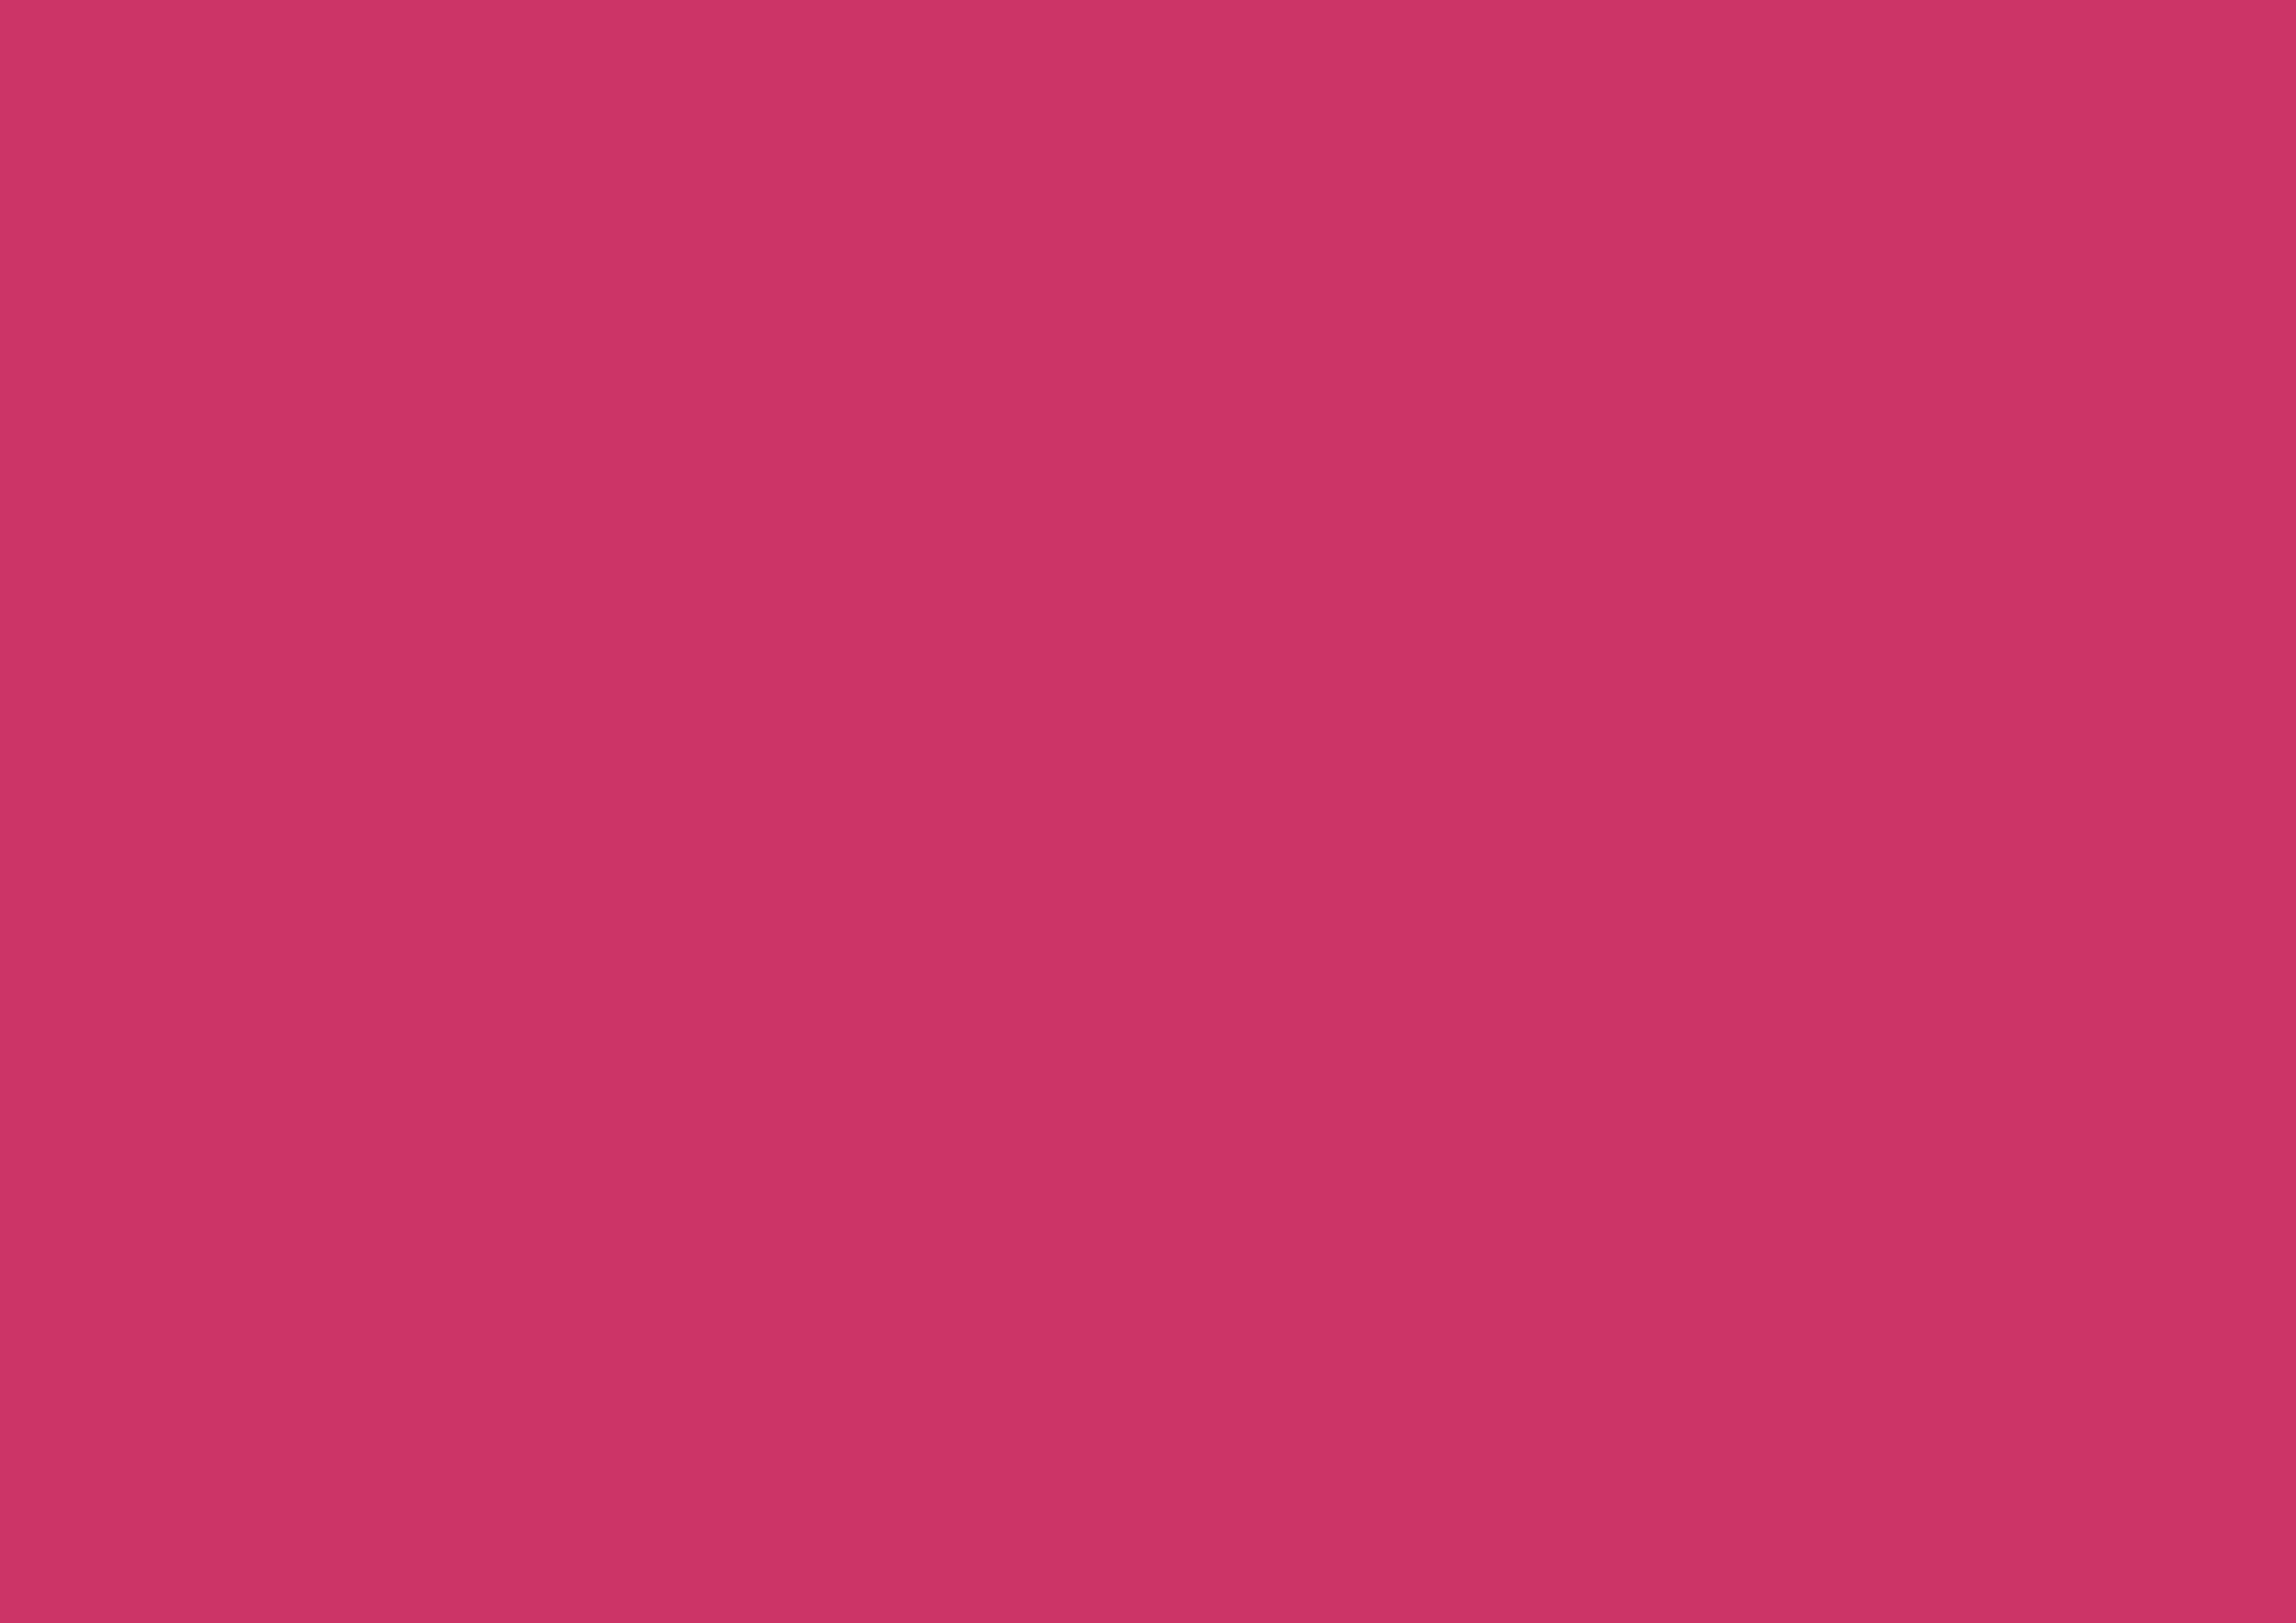 3508x2480 Steel Pink Solid Color Background